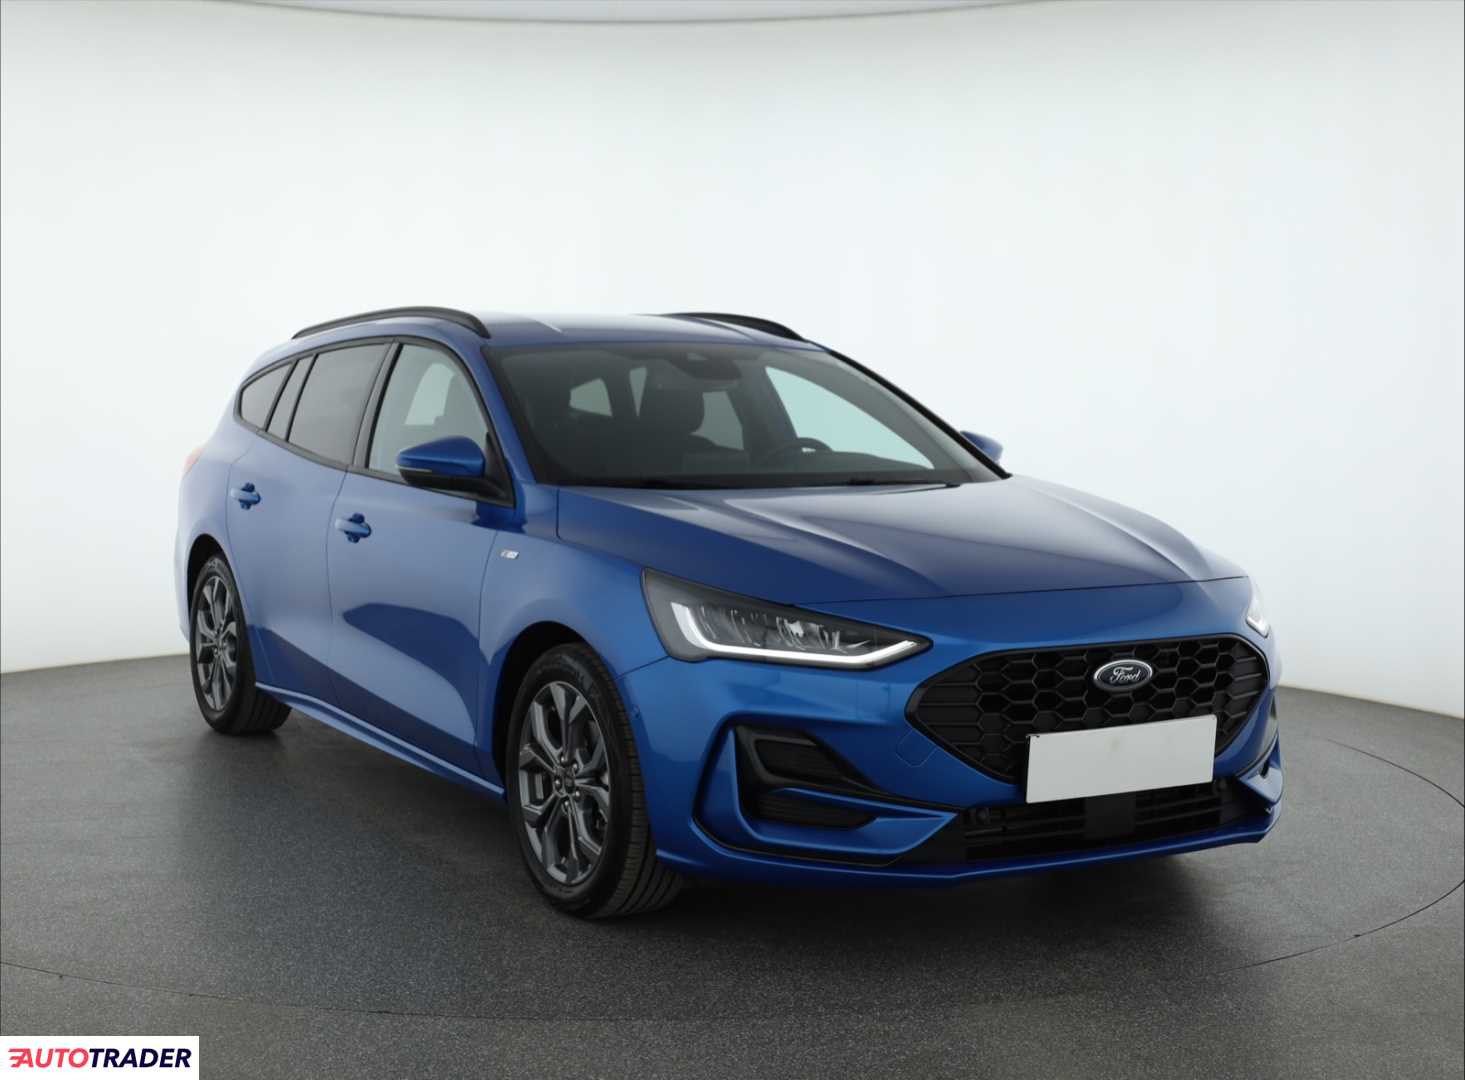 Ford Focus 2022 1.0 152 KM